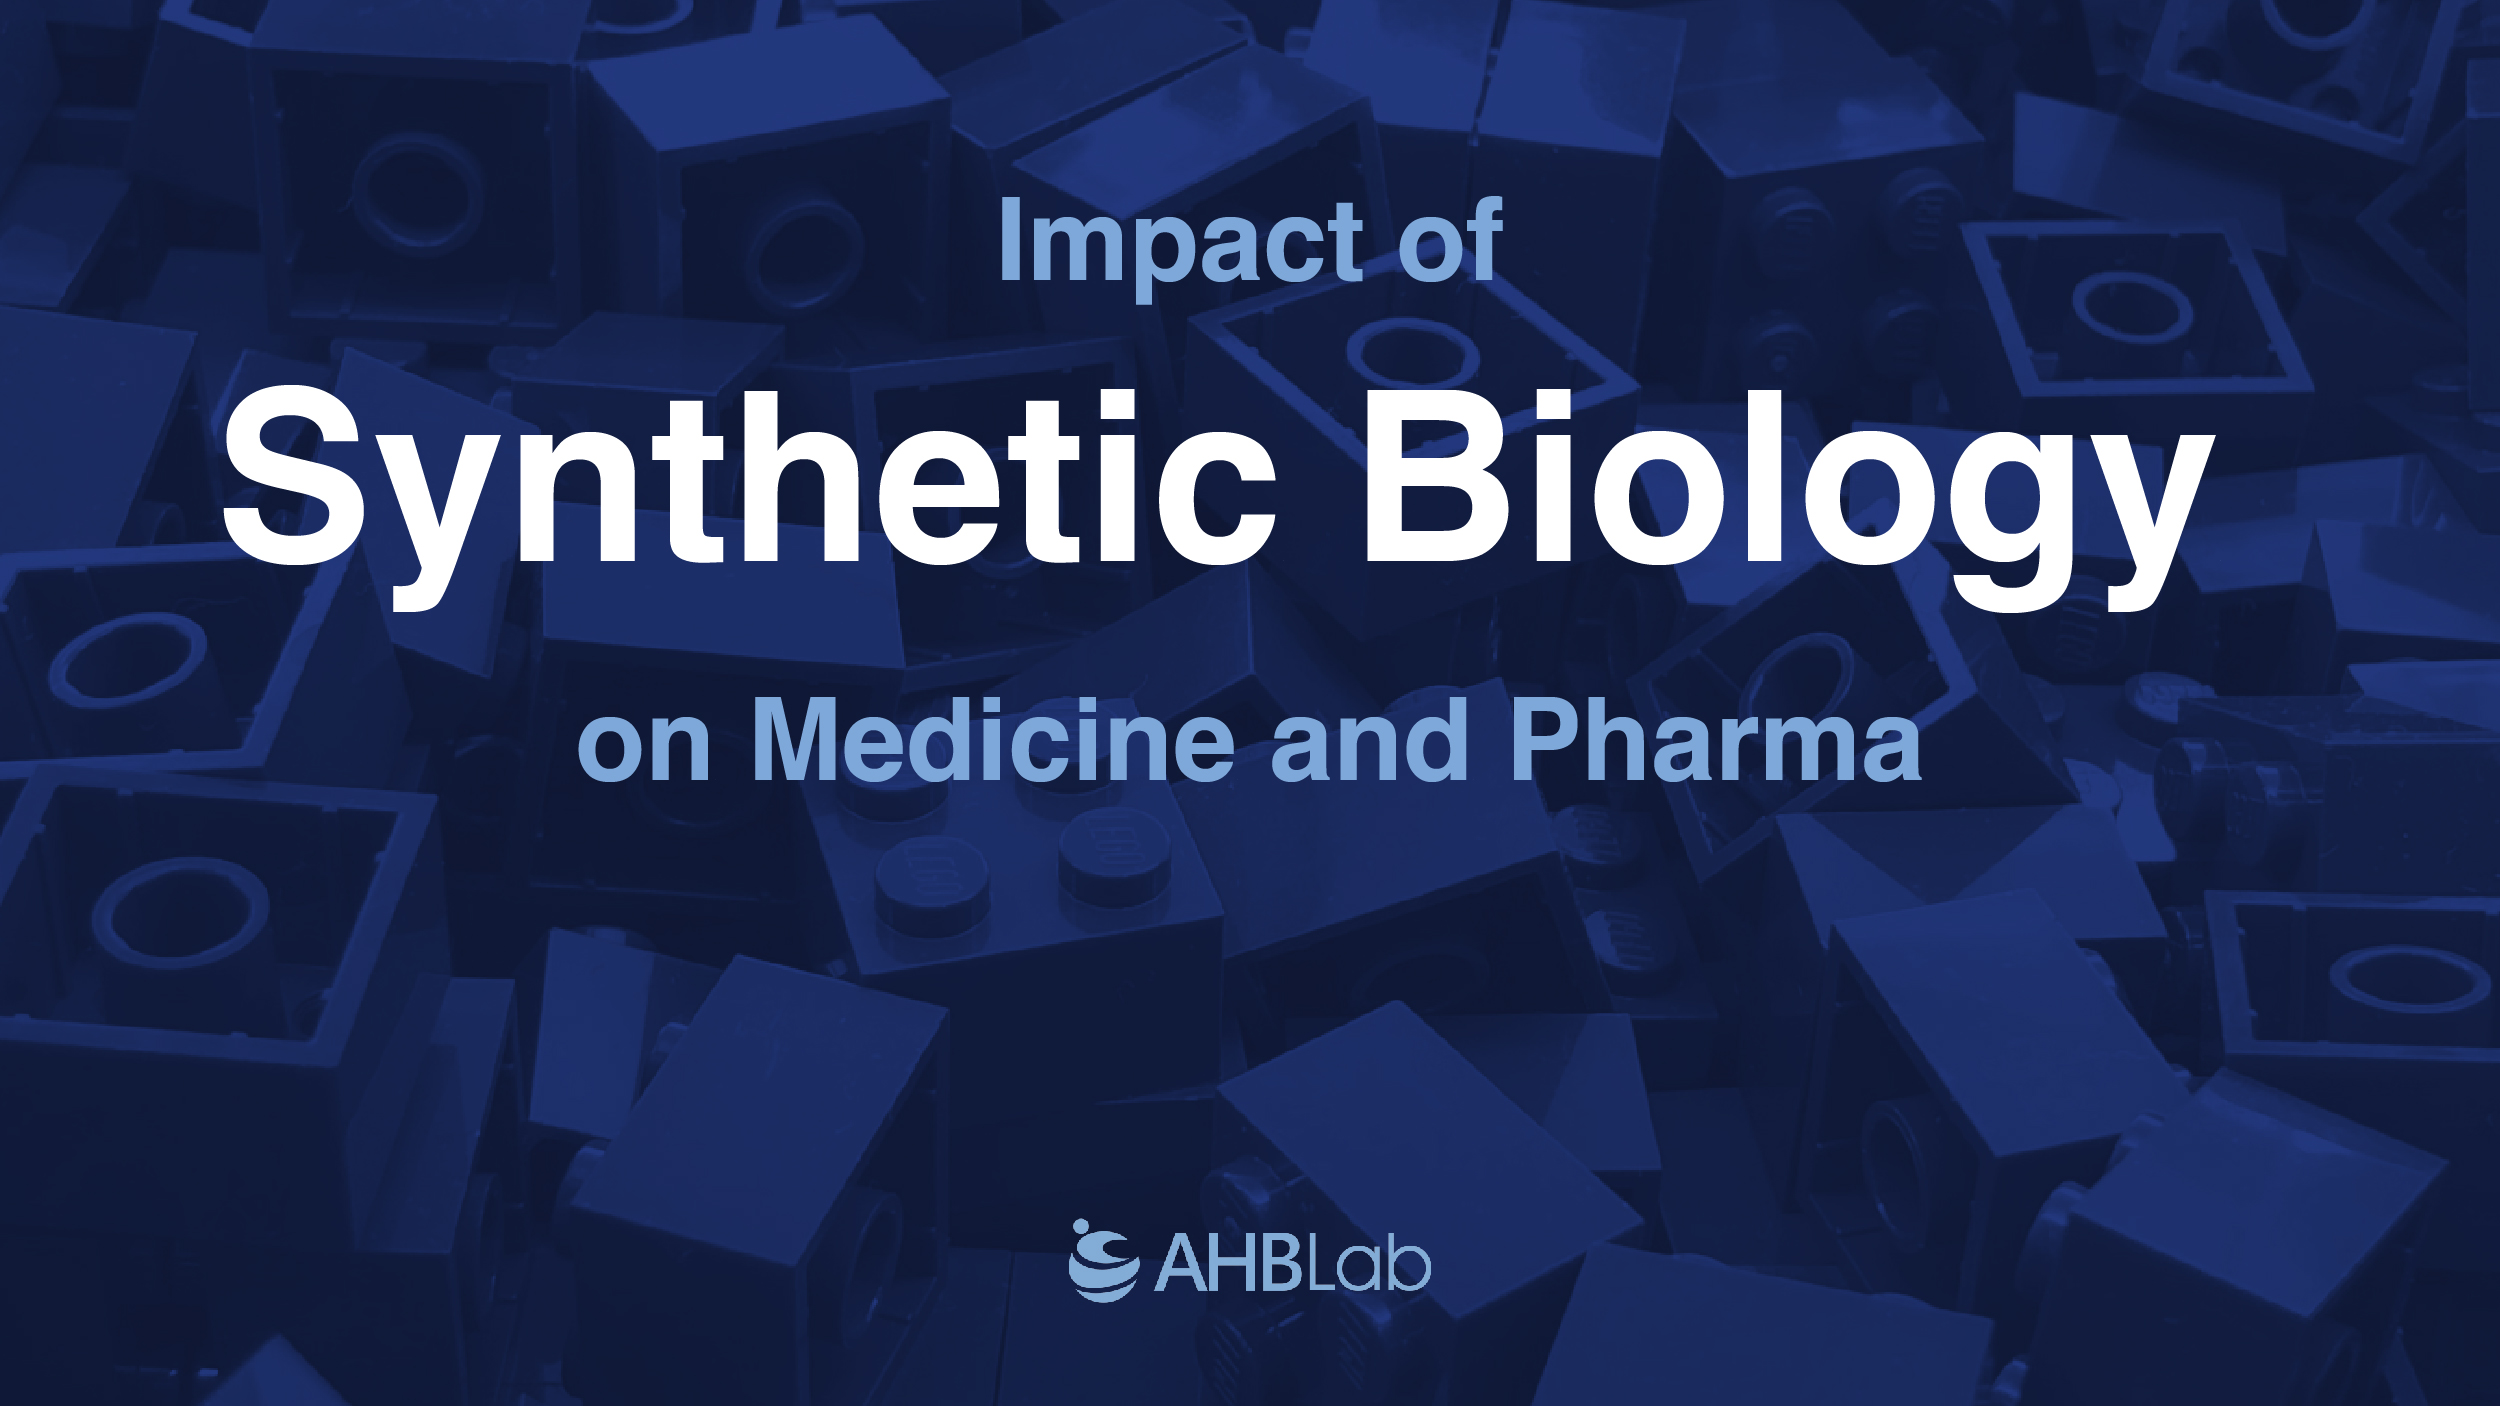 Impact of Synthetic Biology on Medicine and Pharma